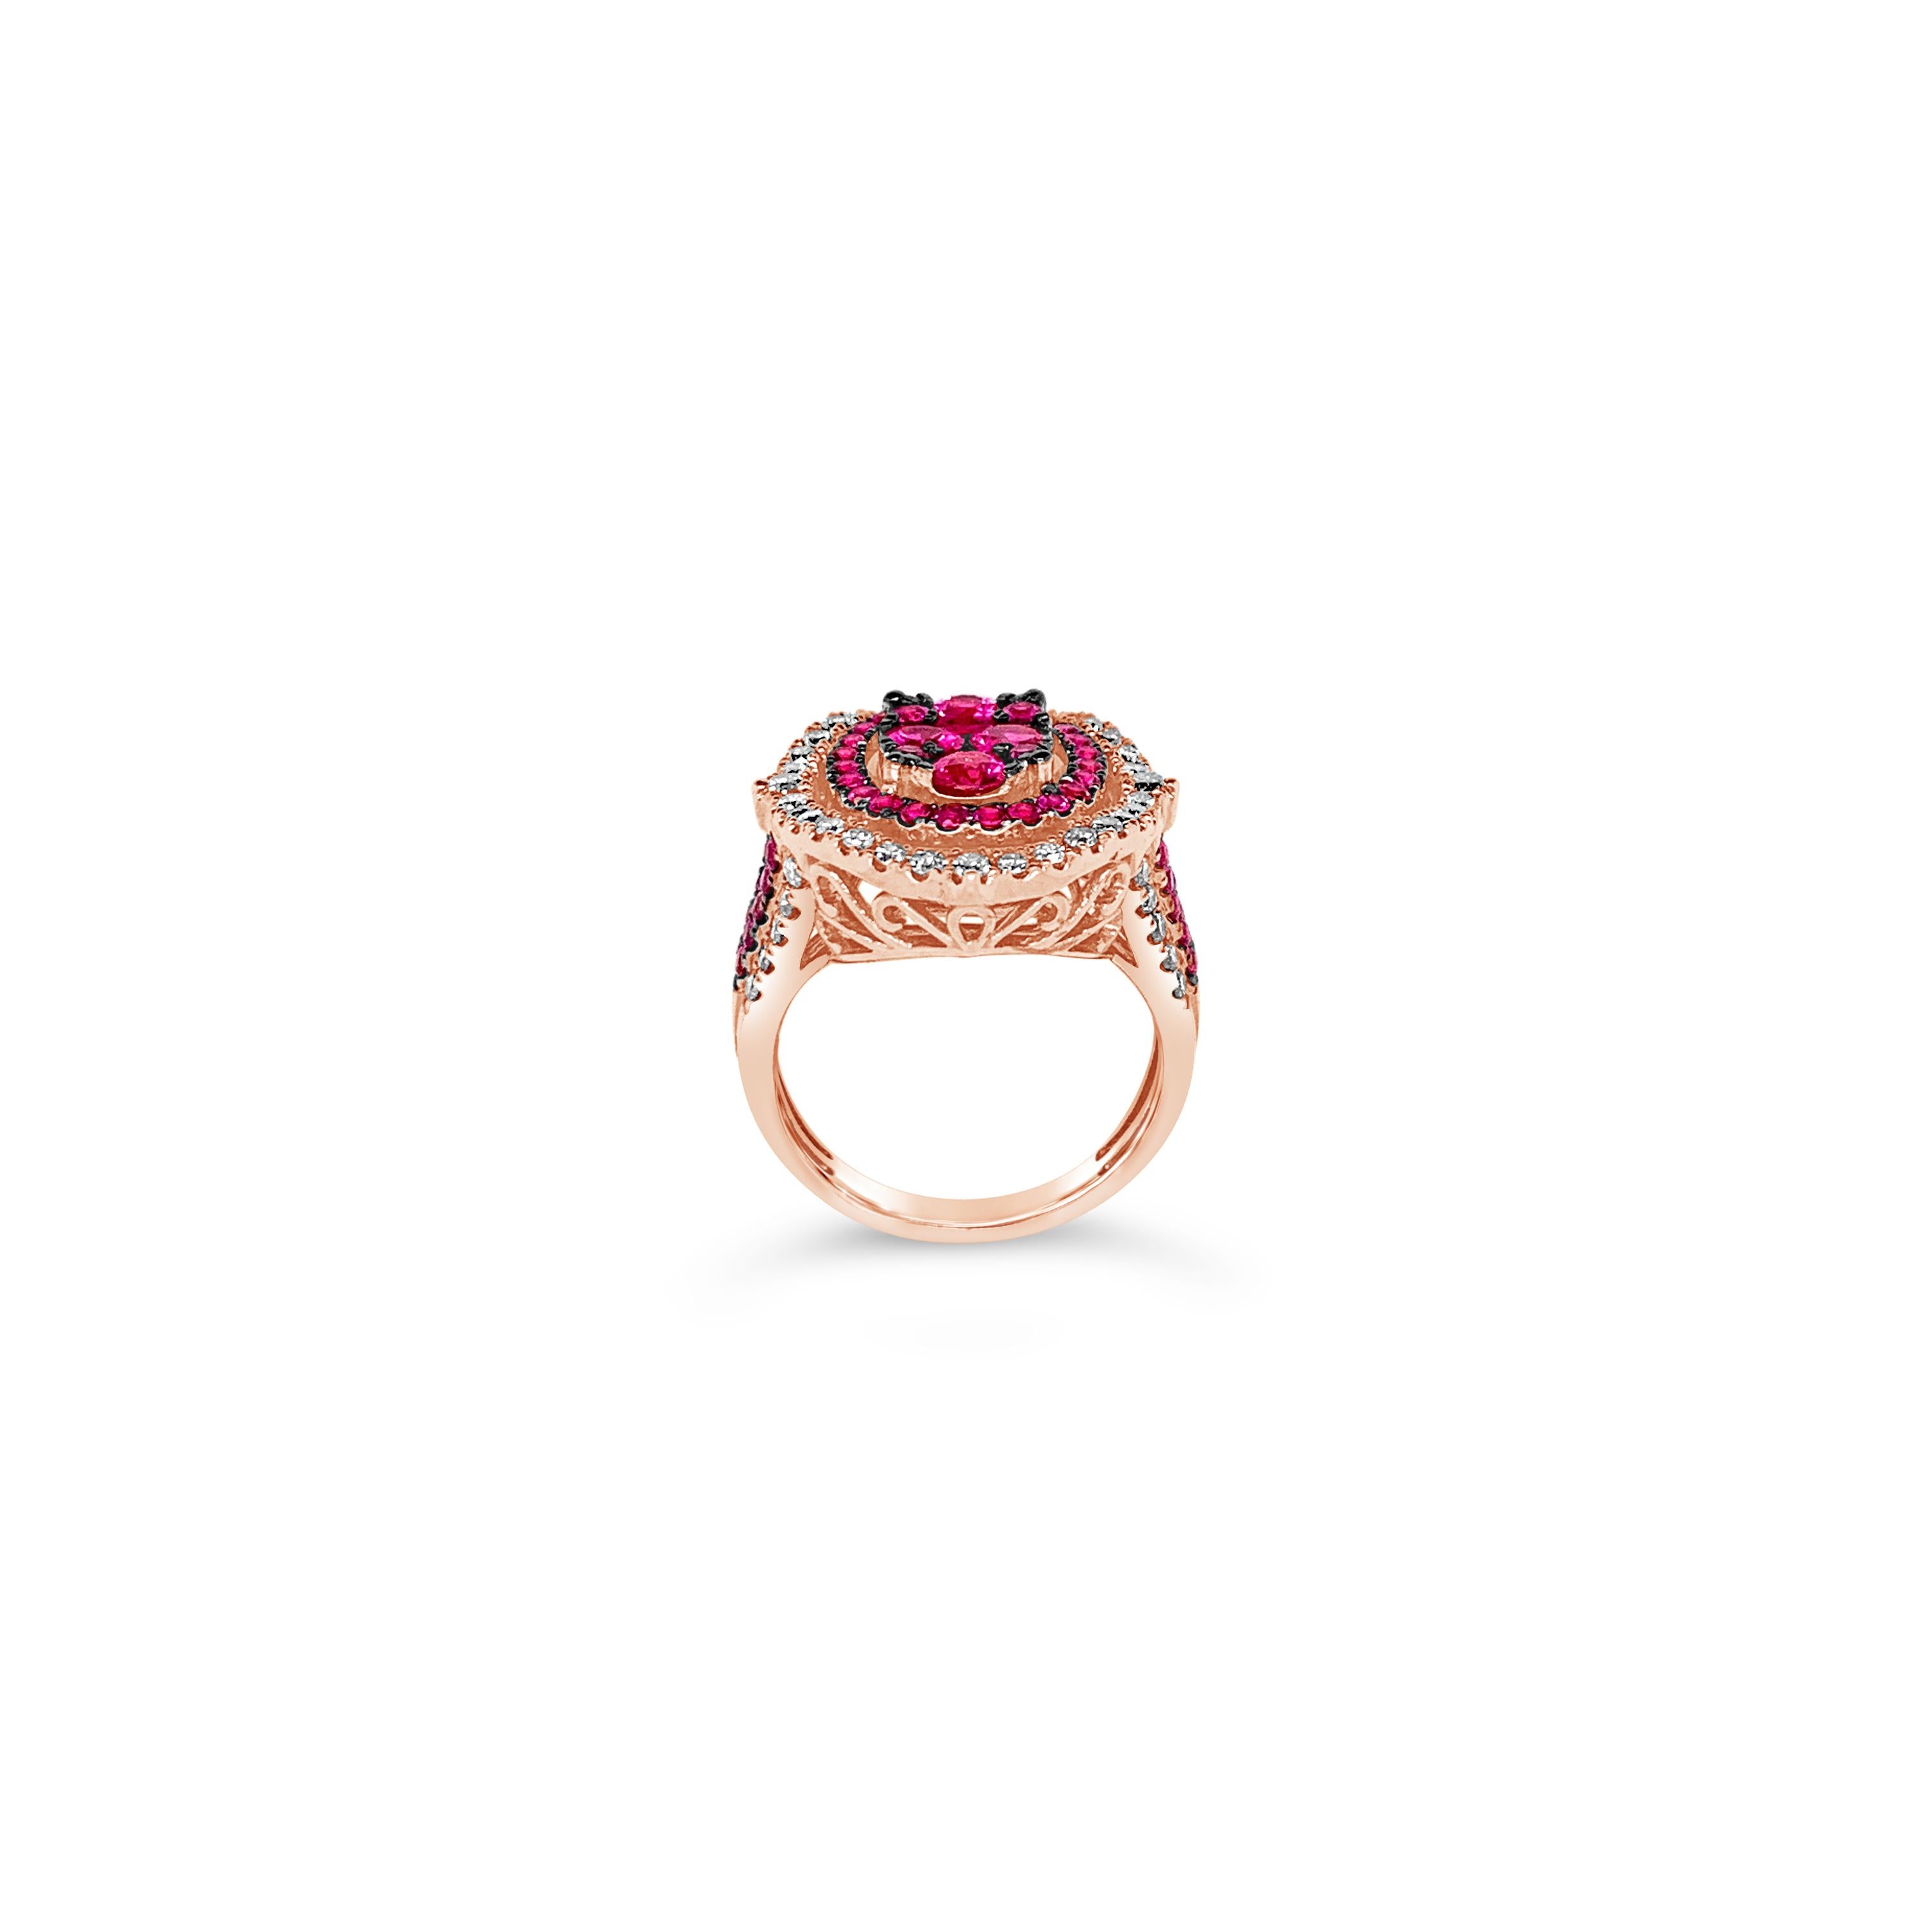 LeVian Creme Brulee® Ring Passion Ruby Nude Diamonds 14K Strawberry Gold®
